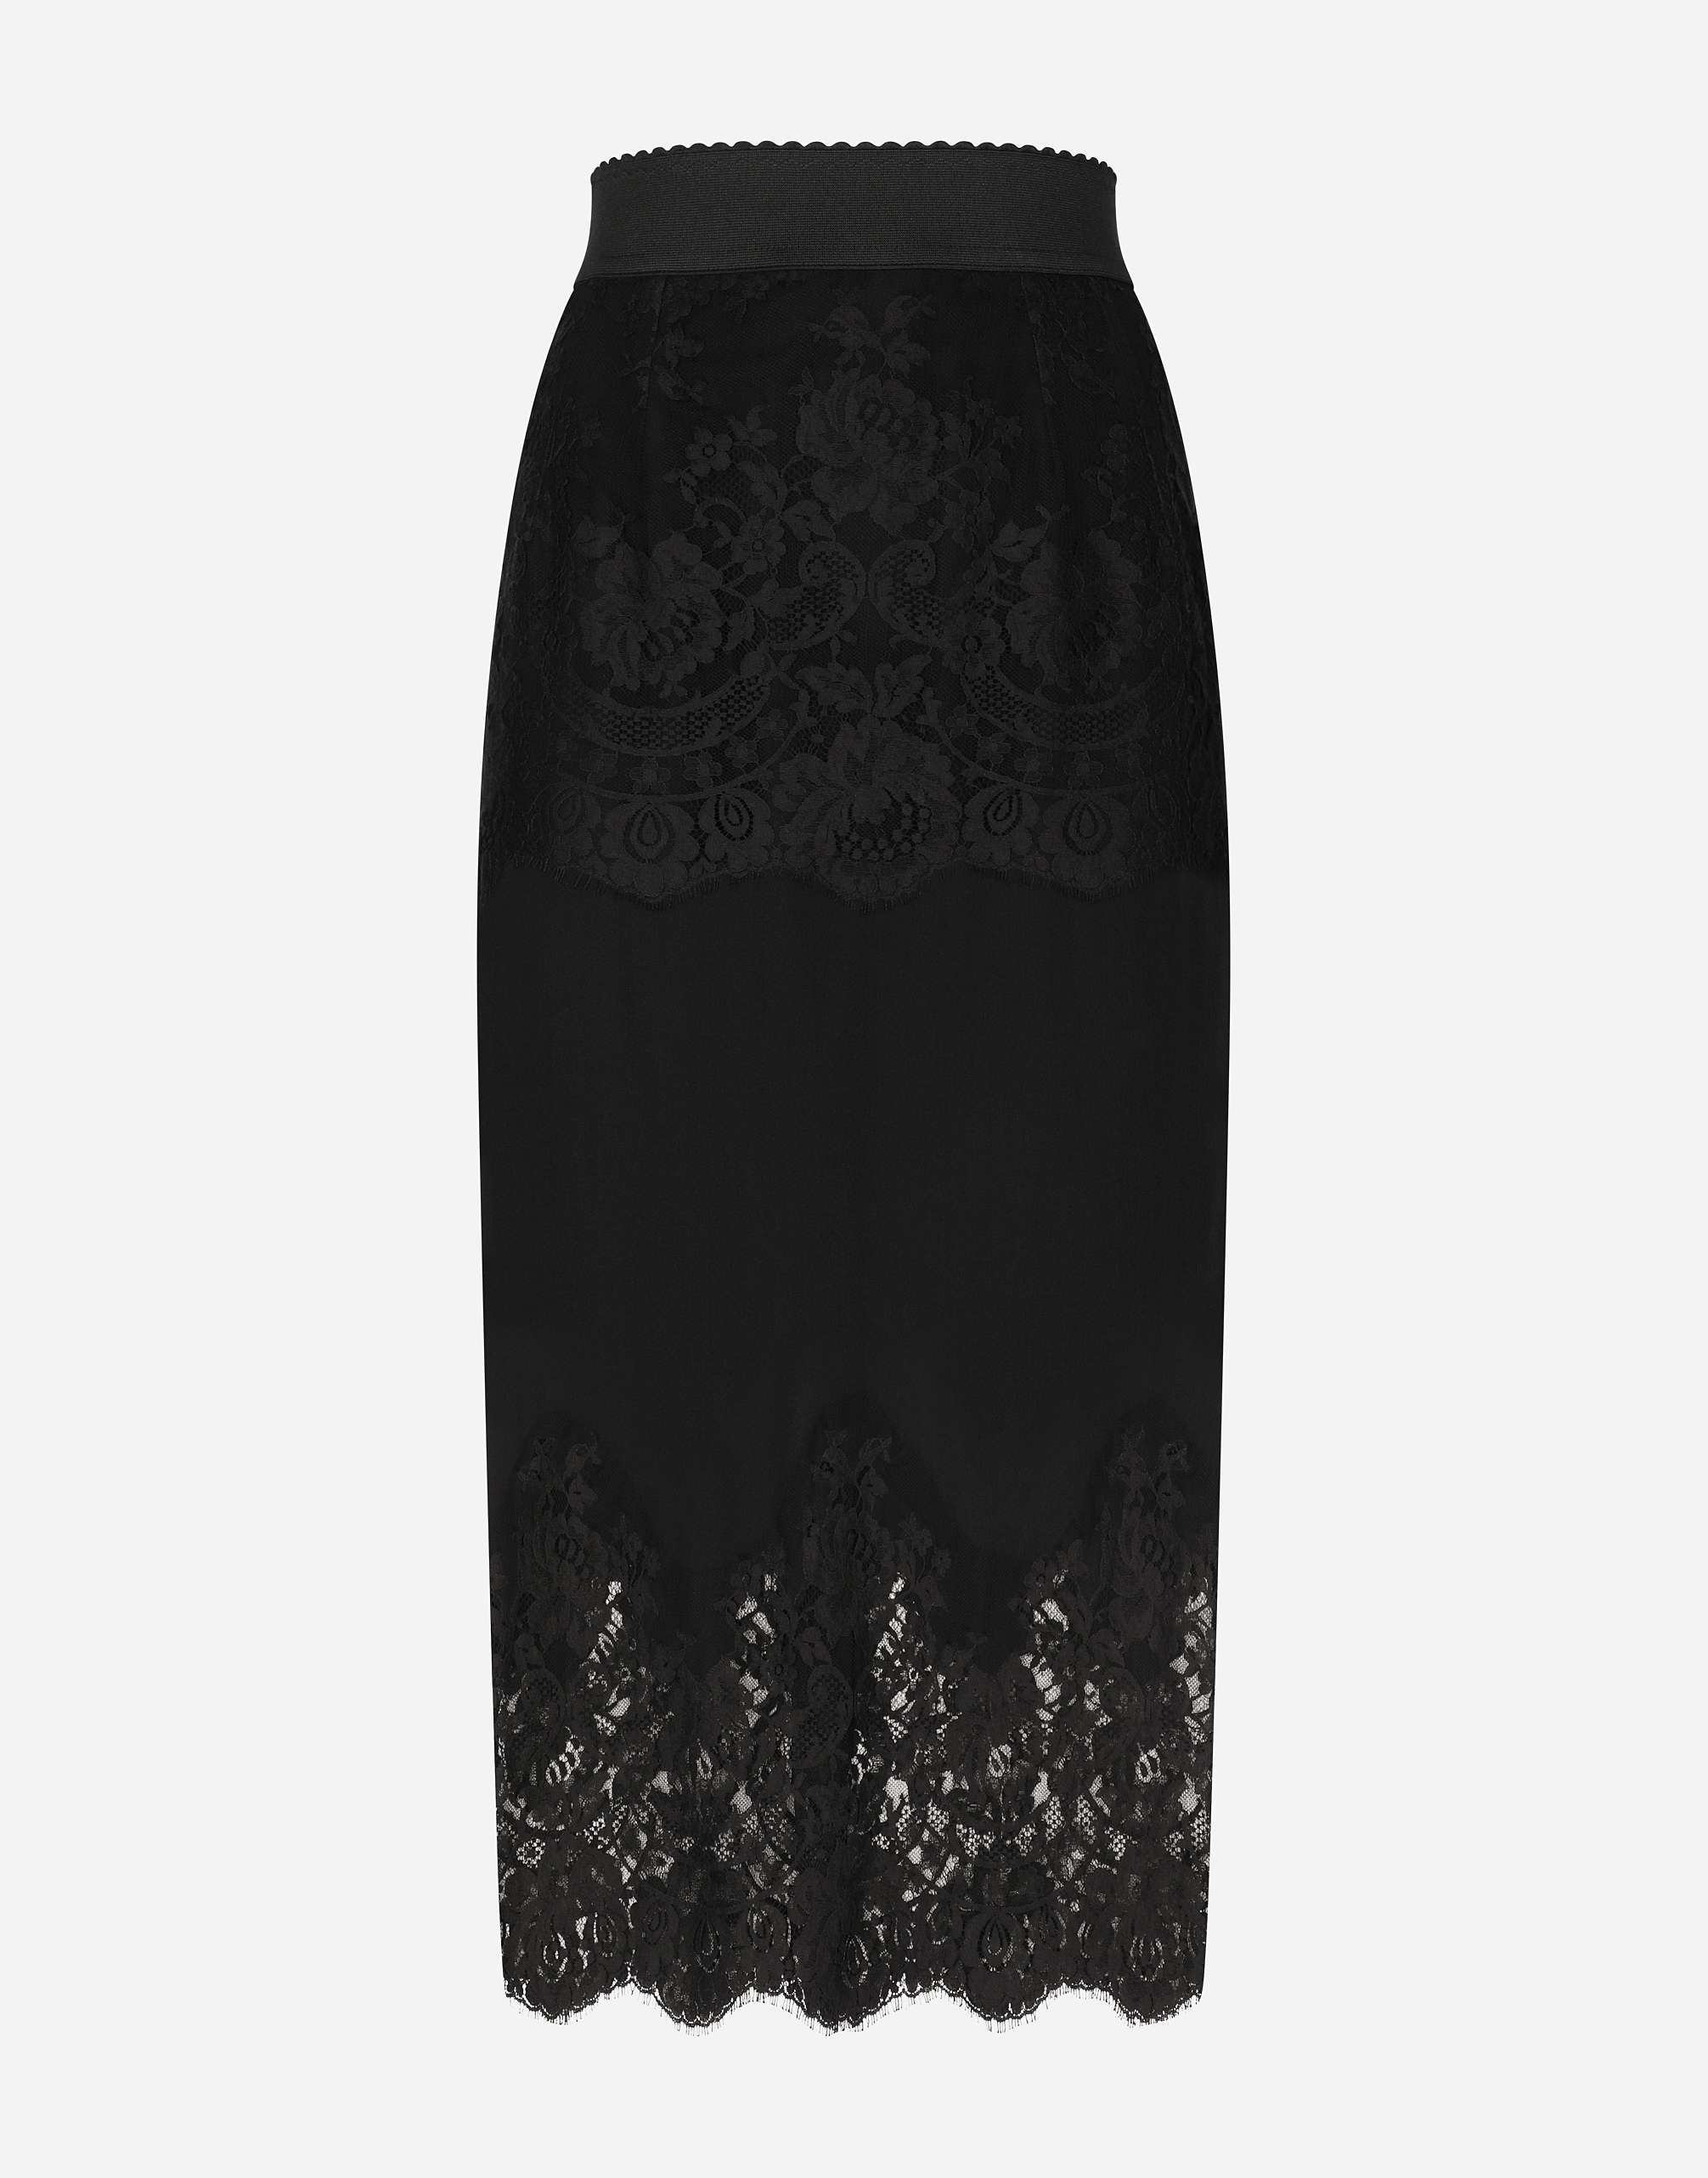 Crepe de chine midi skirt with lace details in Black